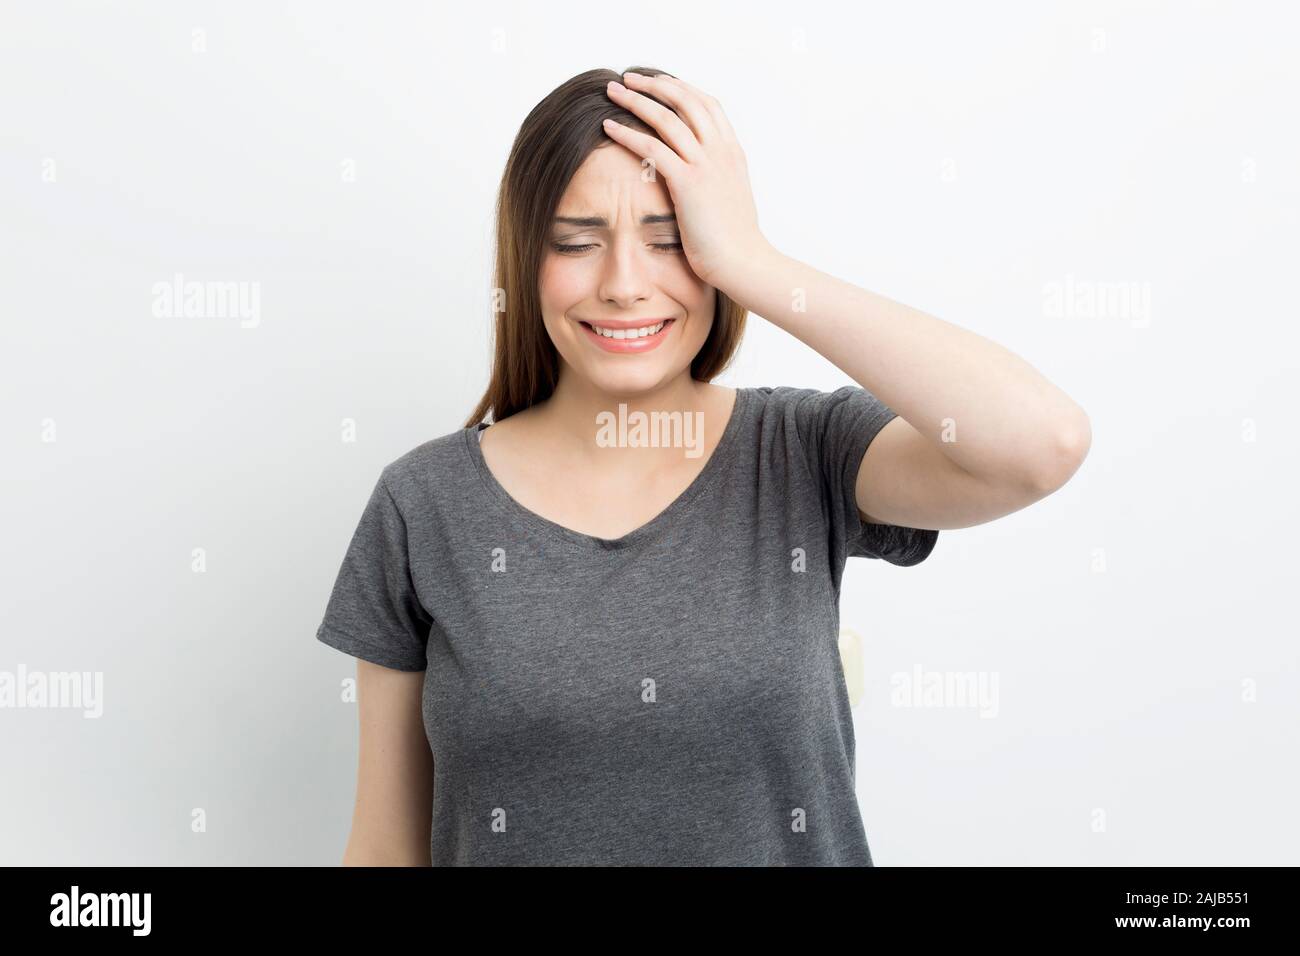 A distressed woman is crying emotionally. Depressed state in a girl. Stock Photo